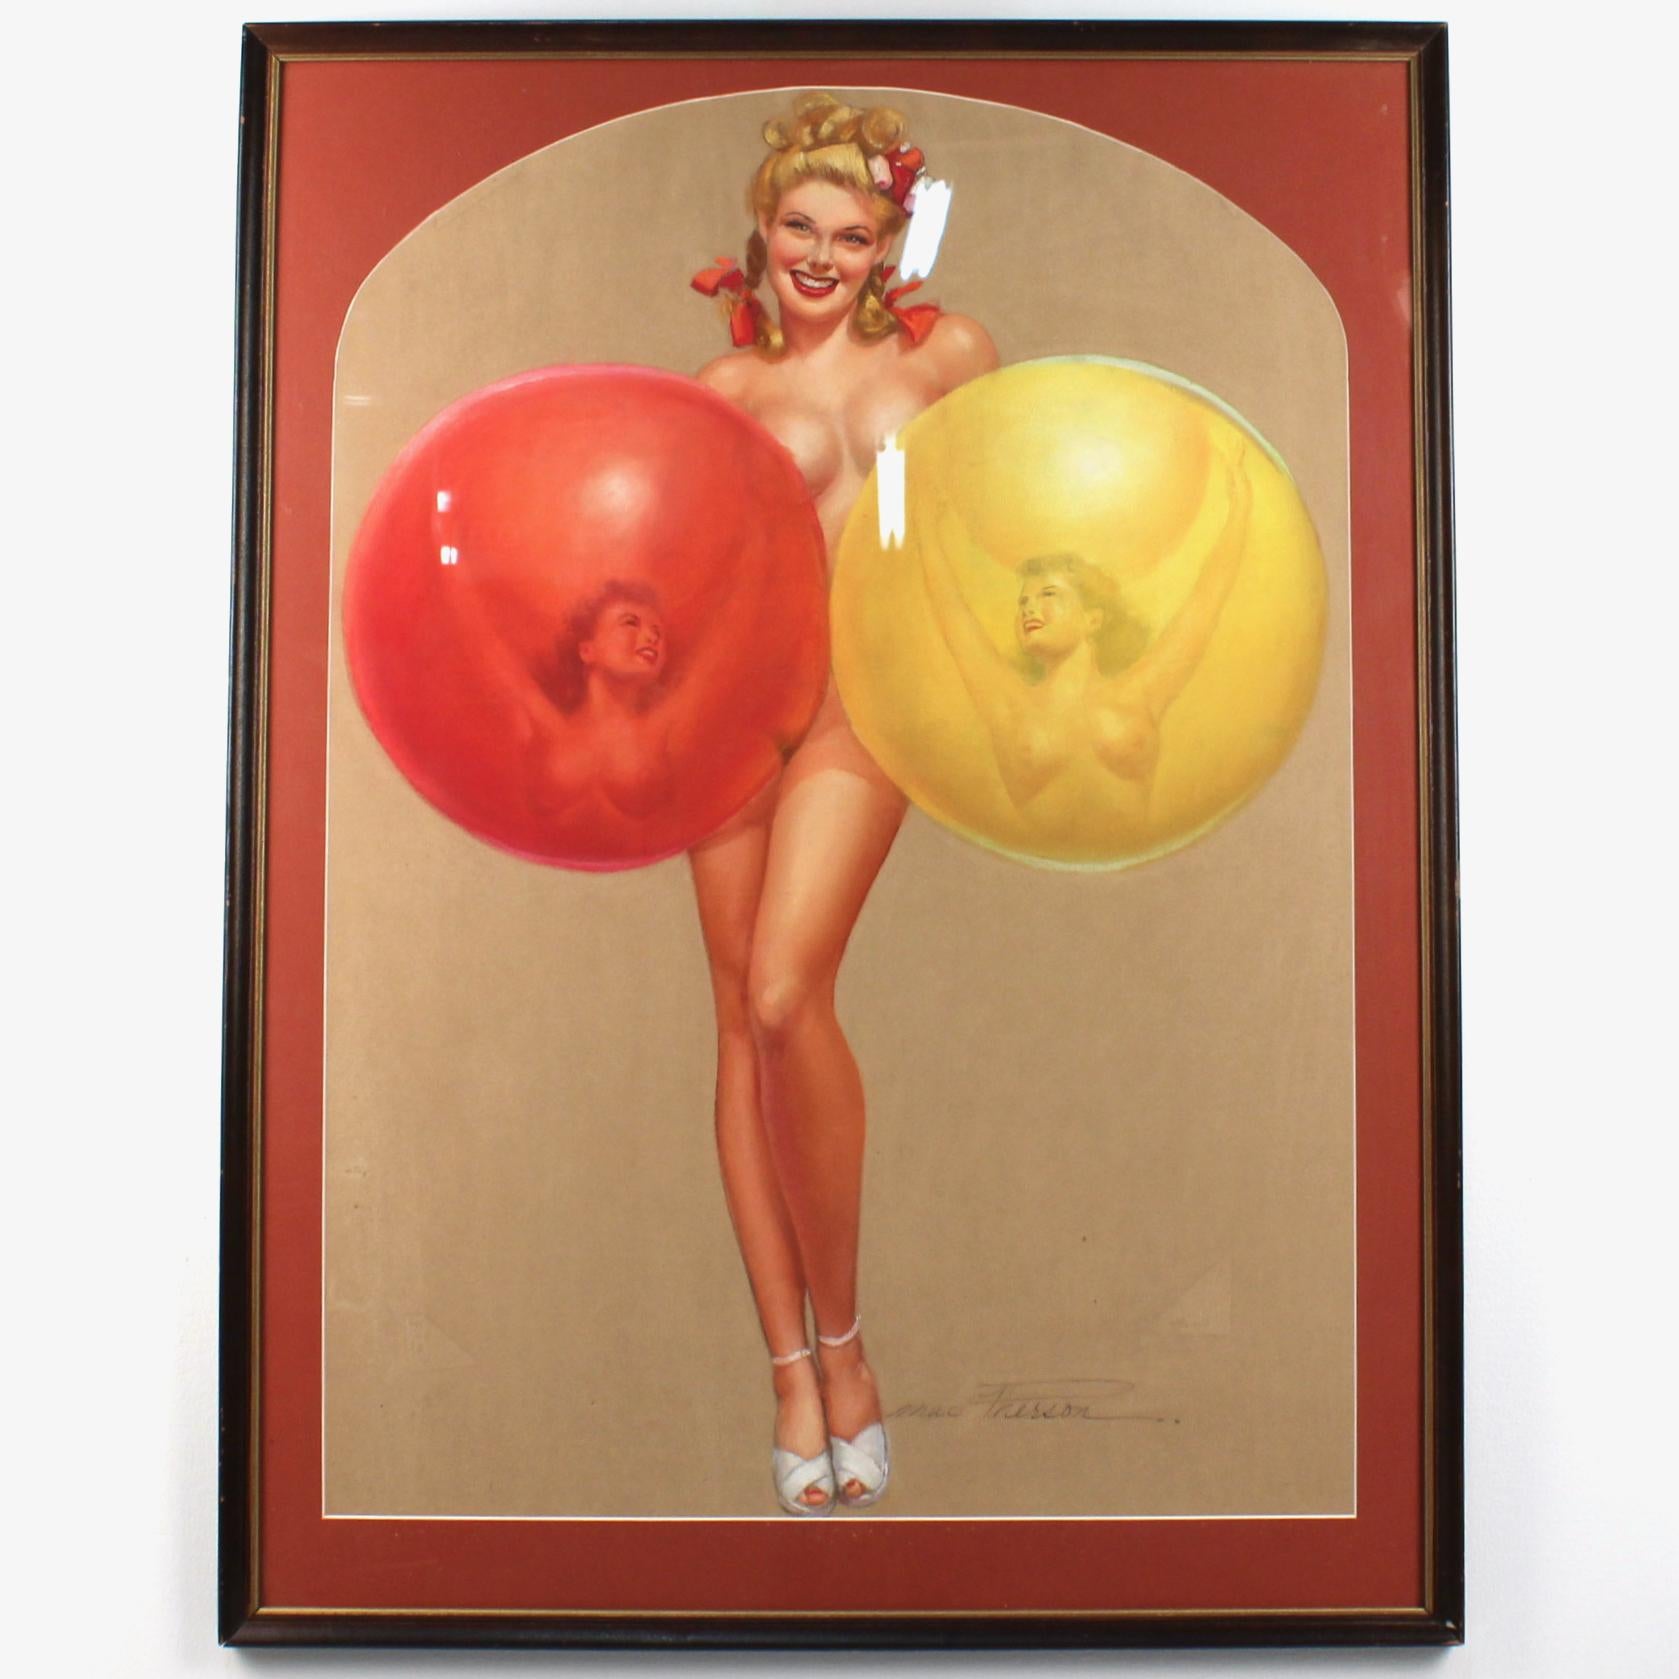 Offered here for your consideration is a vintage original Earl MacPherson pastel painting of a pin-up girl.

Depicting a blond, smiling, nude pin-up girl dressed only with two large balloons and white high heel shoes. The yellow and red balloon